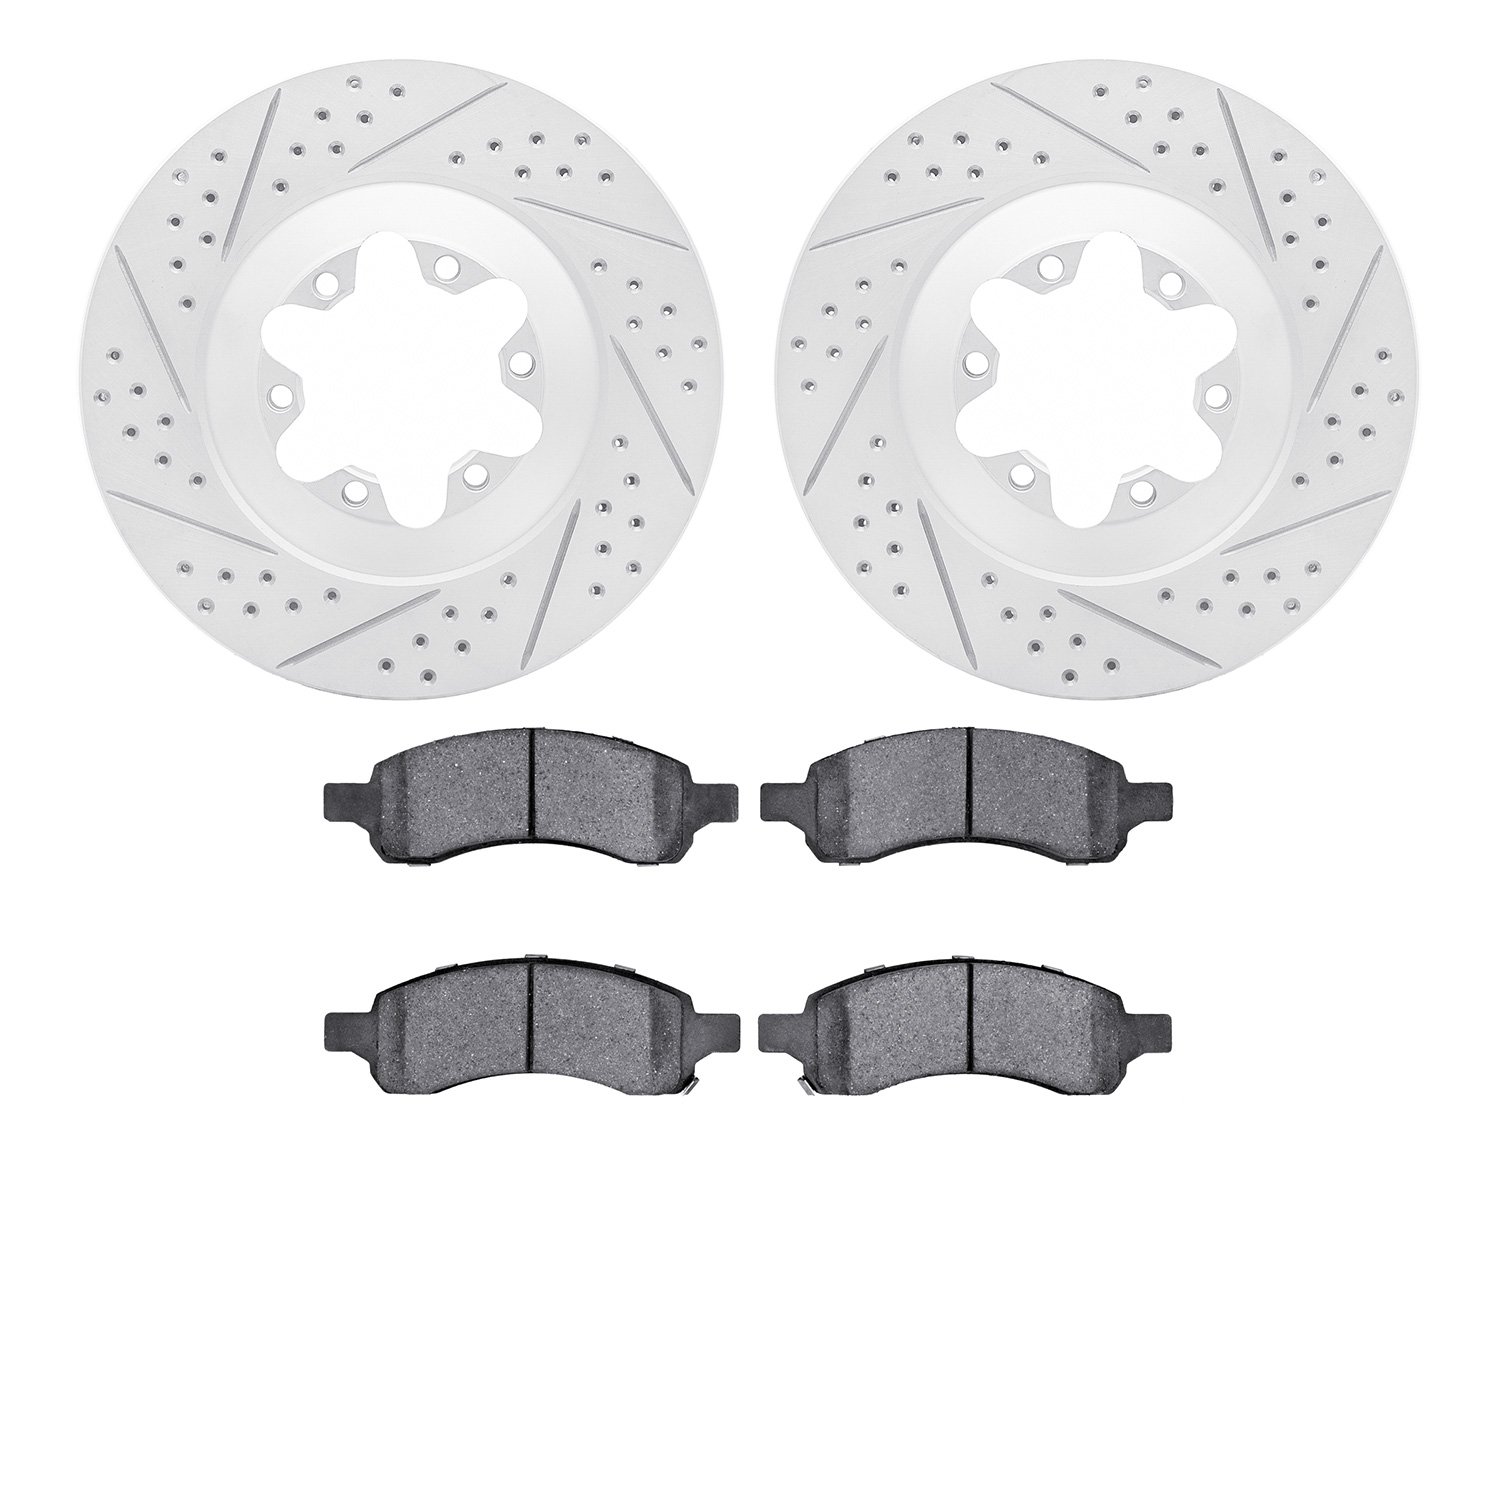 2502-48060 Geoperformance Drilled/Slotted Rotors w/5000 Advanced Brake Pads Kit, 2009-2012 GM, Position: Front